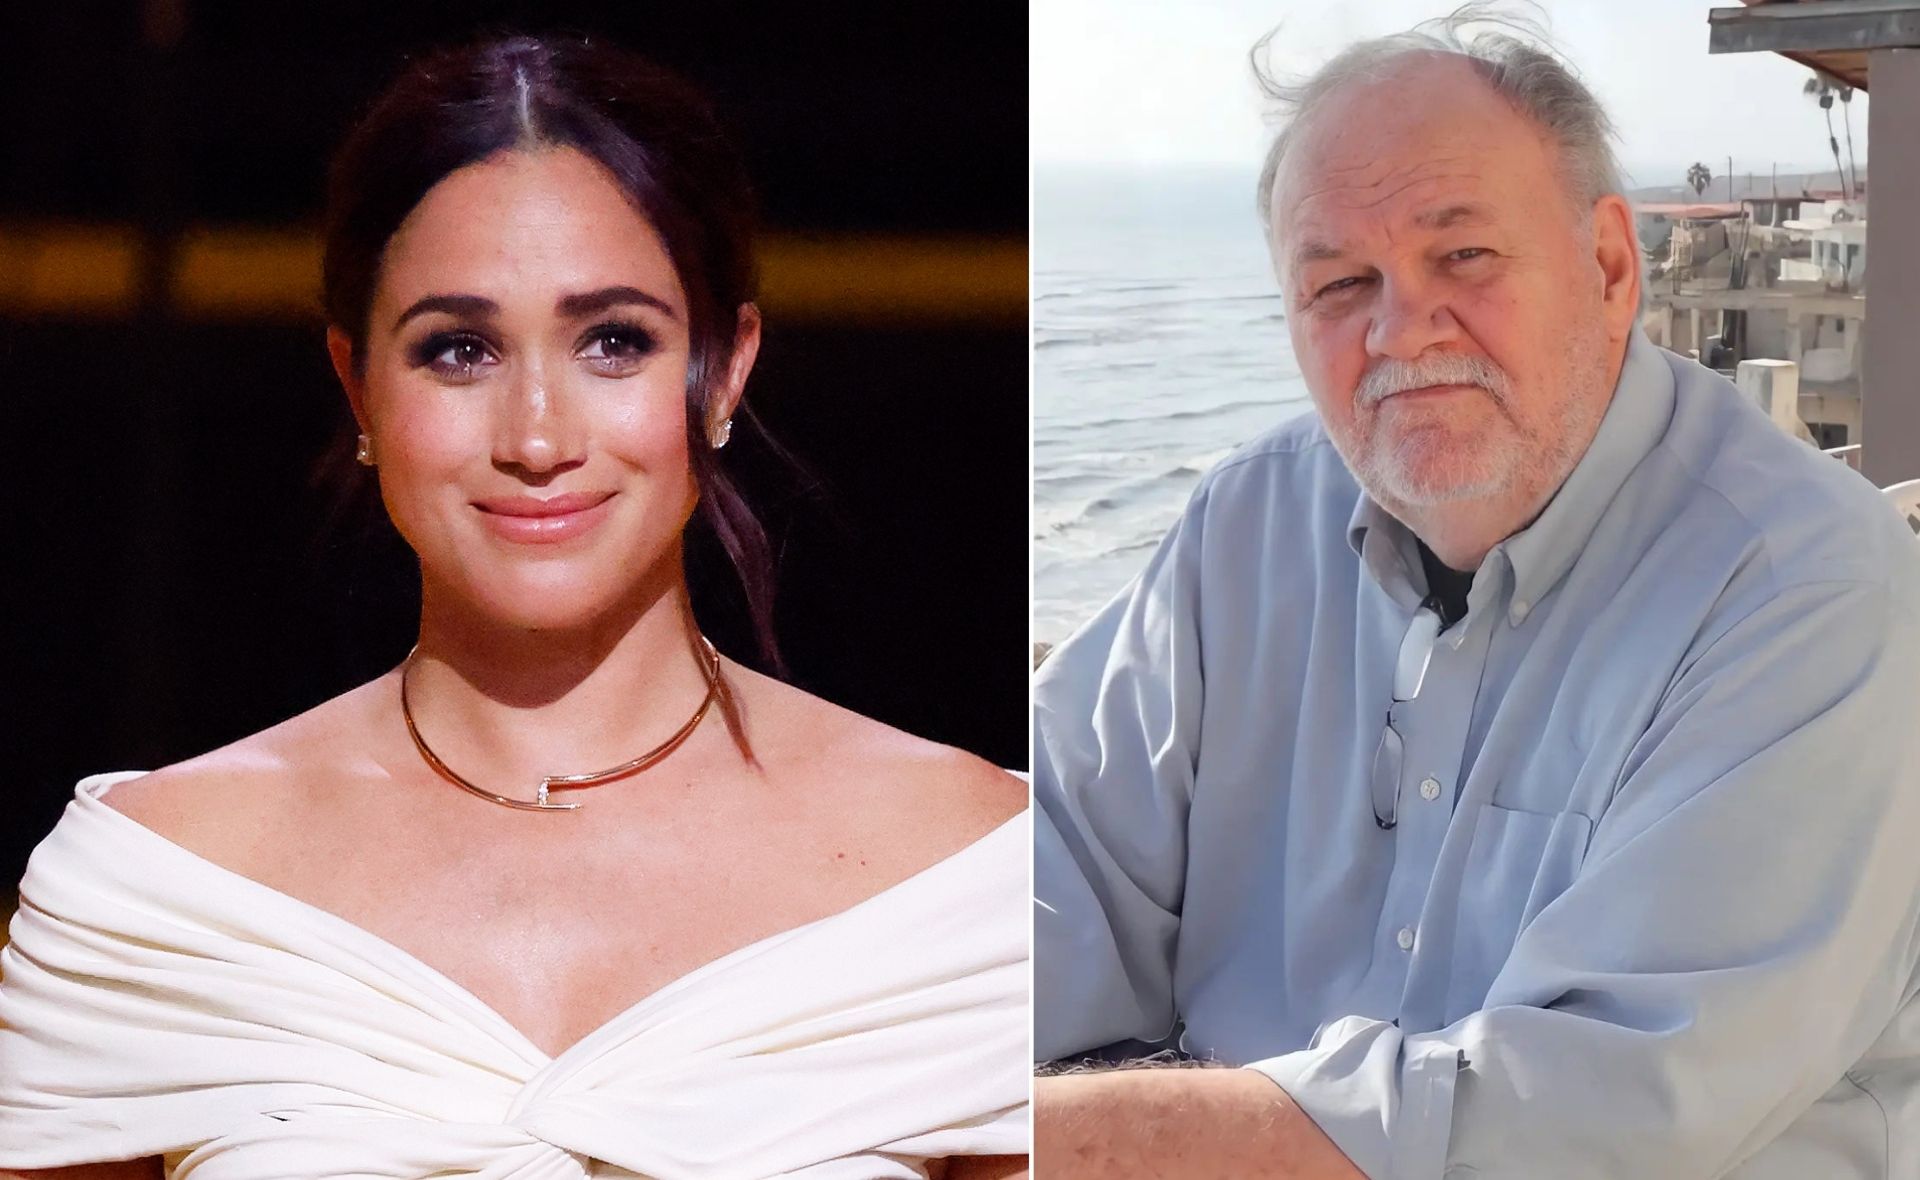 Meghan Markle’s estranged dad Thomas is “unable to speak” after suffering a stroke